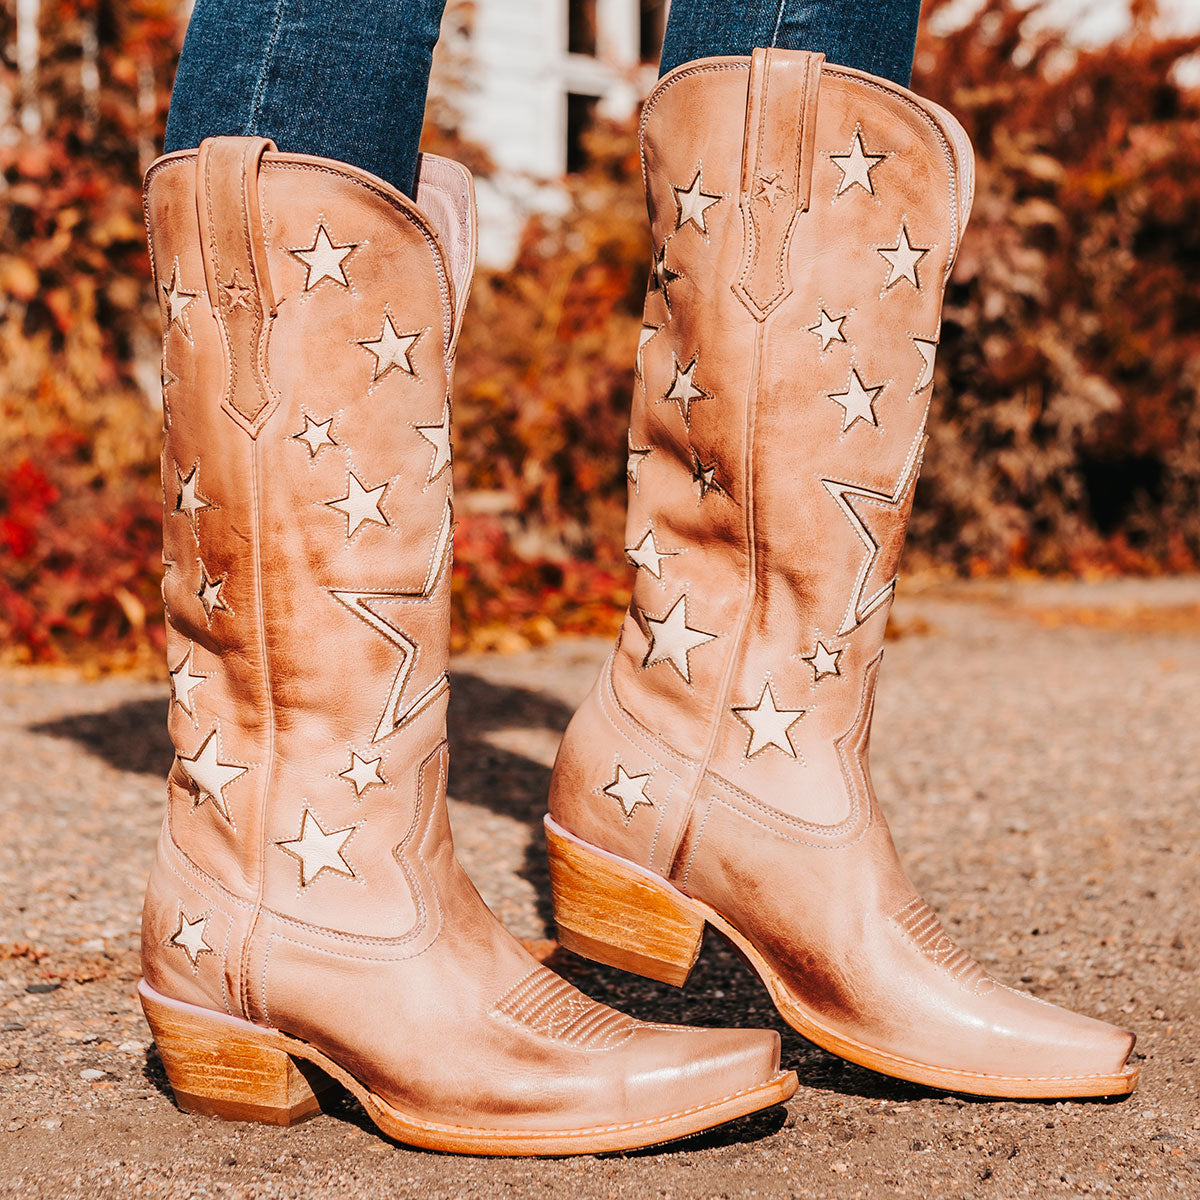 FREEBIRD women's Starzz blush leather cowboy boot with two-toned leather star inlay detailing traditional stitching and snip toe construction